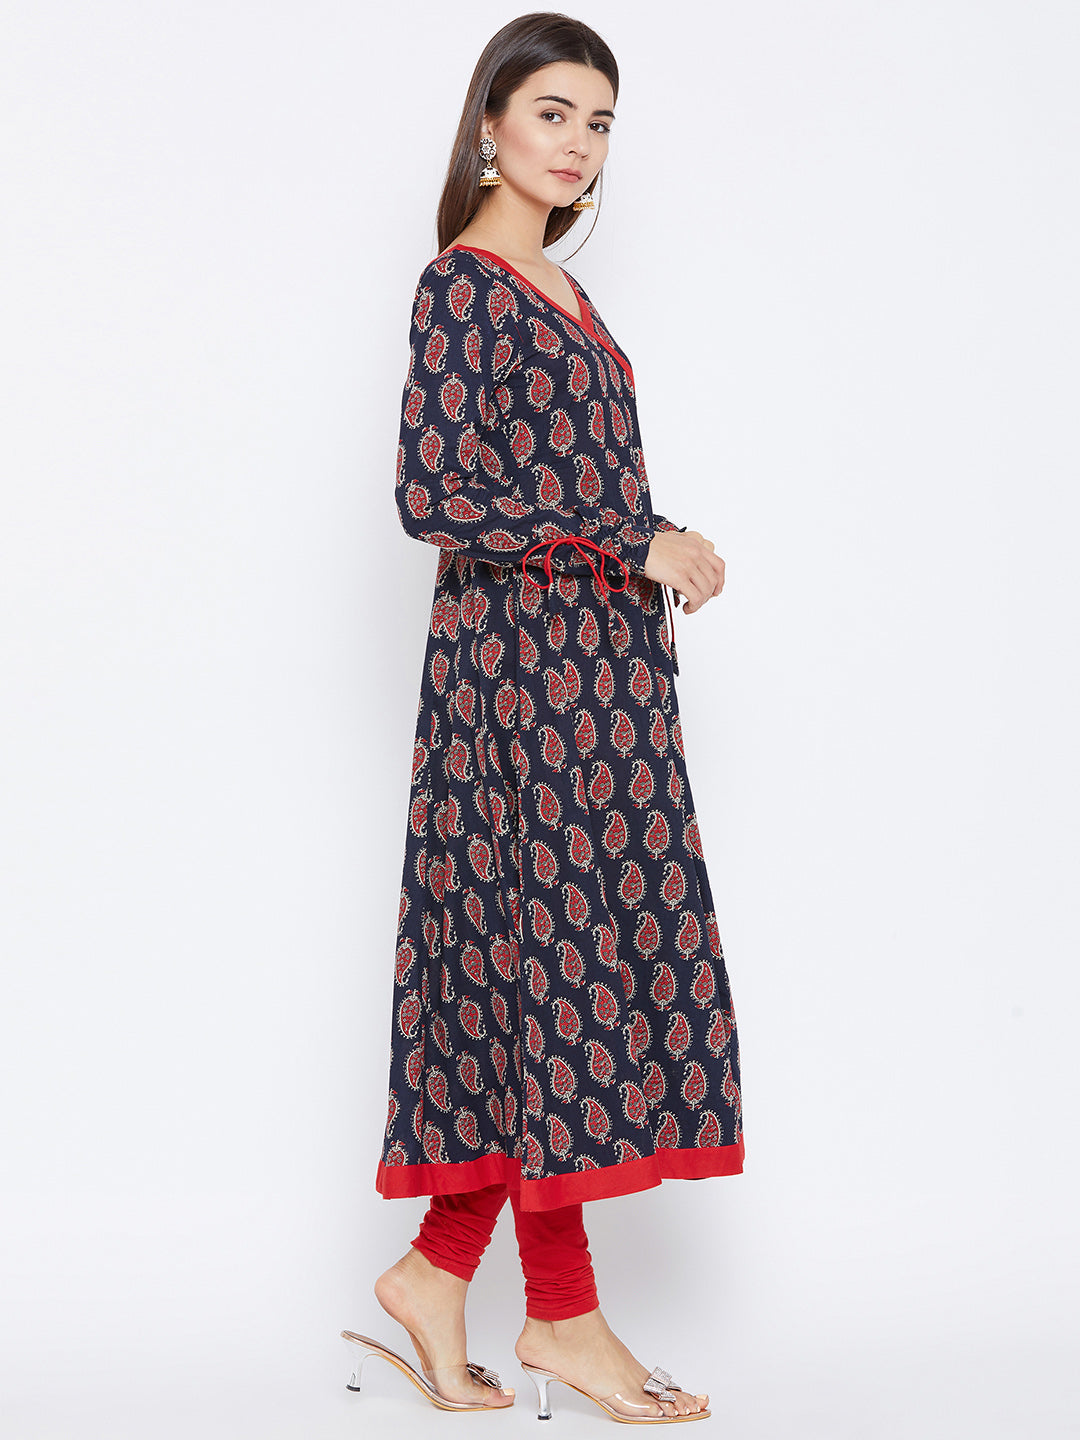 Women's Navy Blue And Red Color Paisley Printed Anarkali Ankle Length Kurta